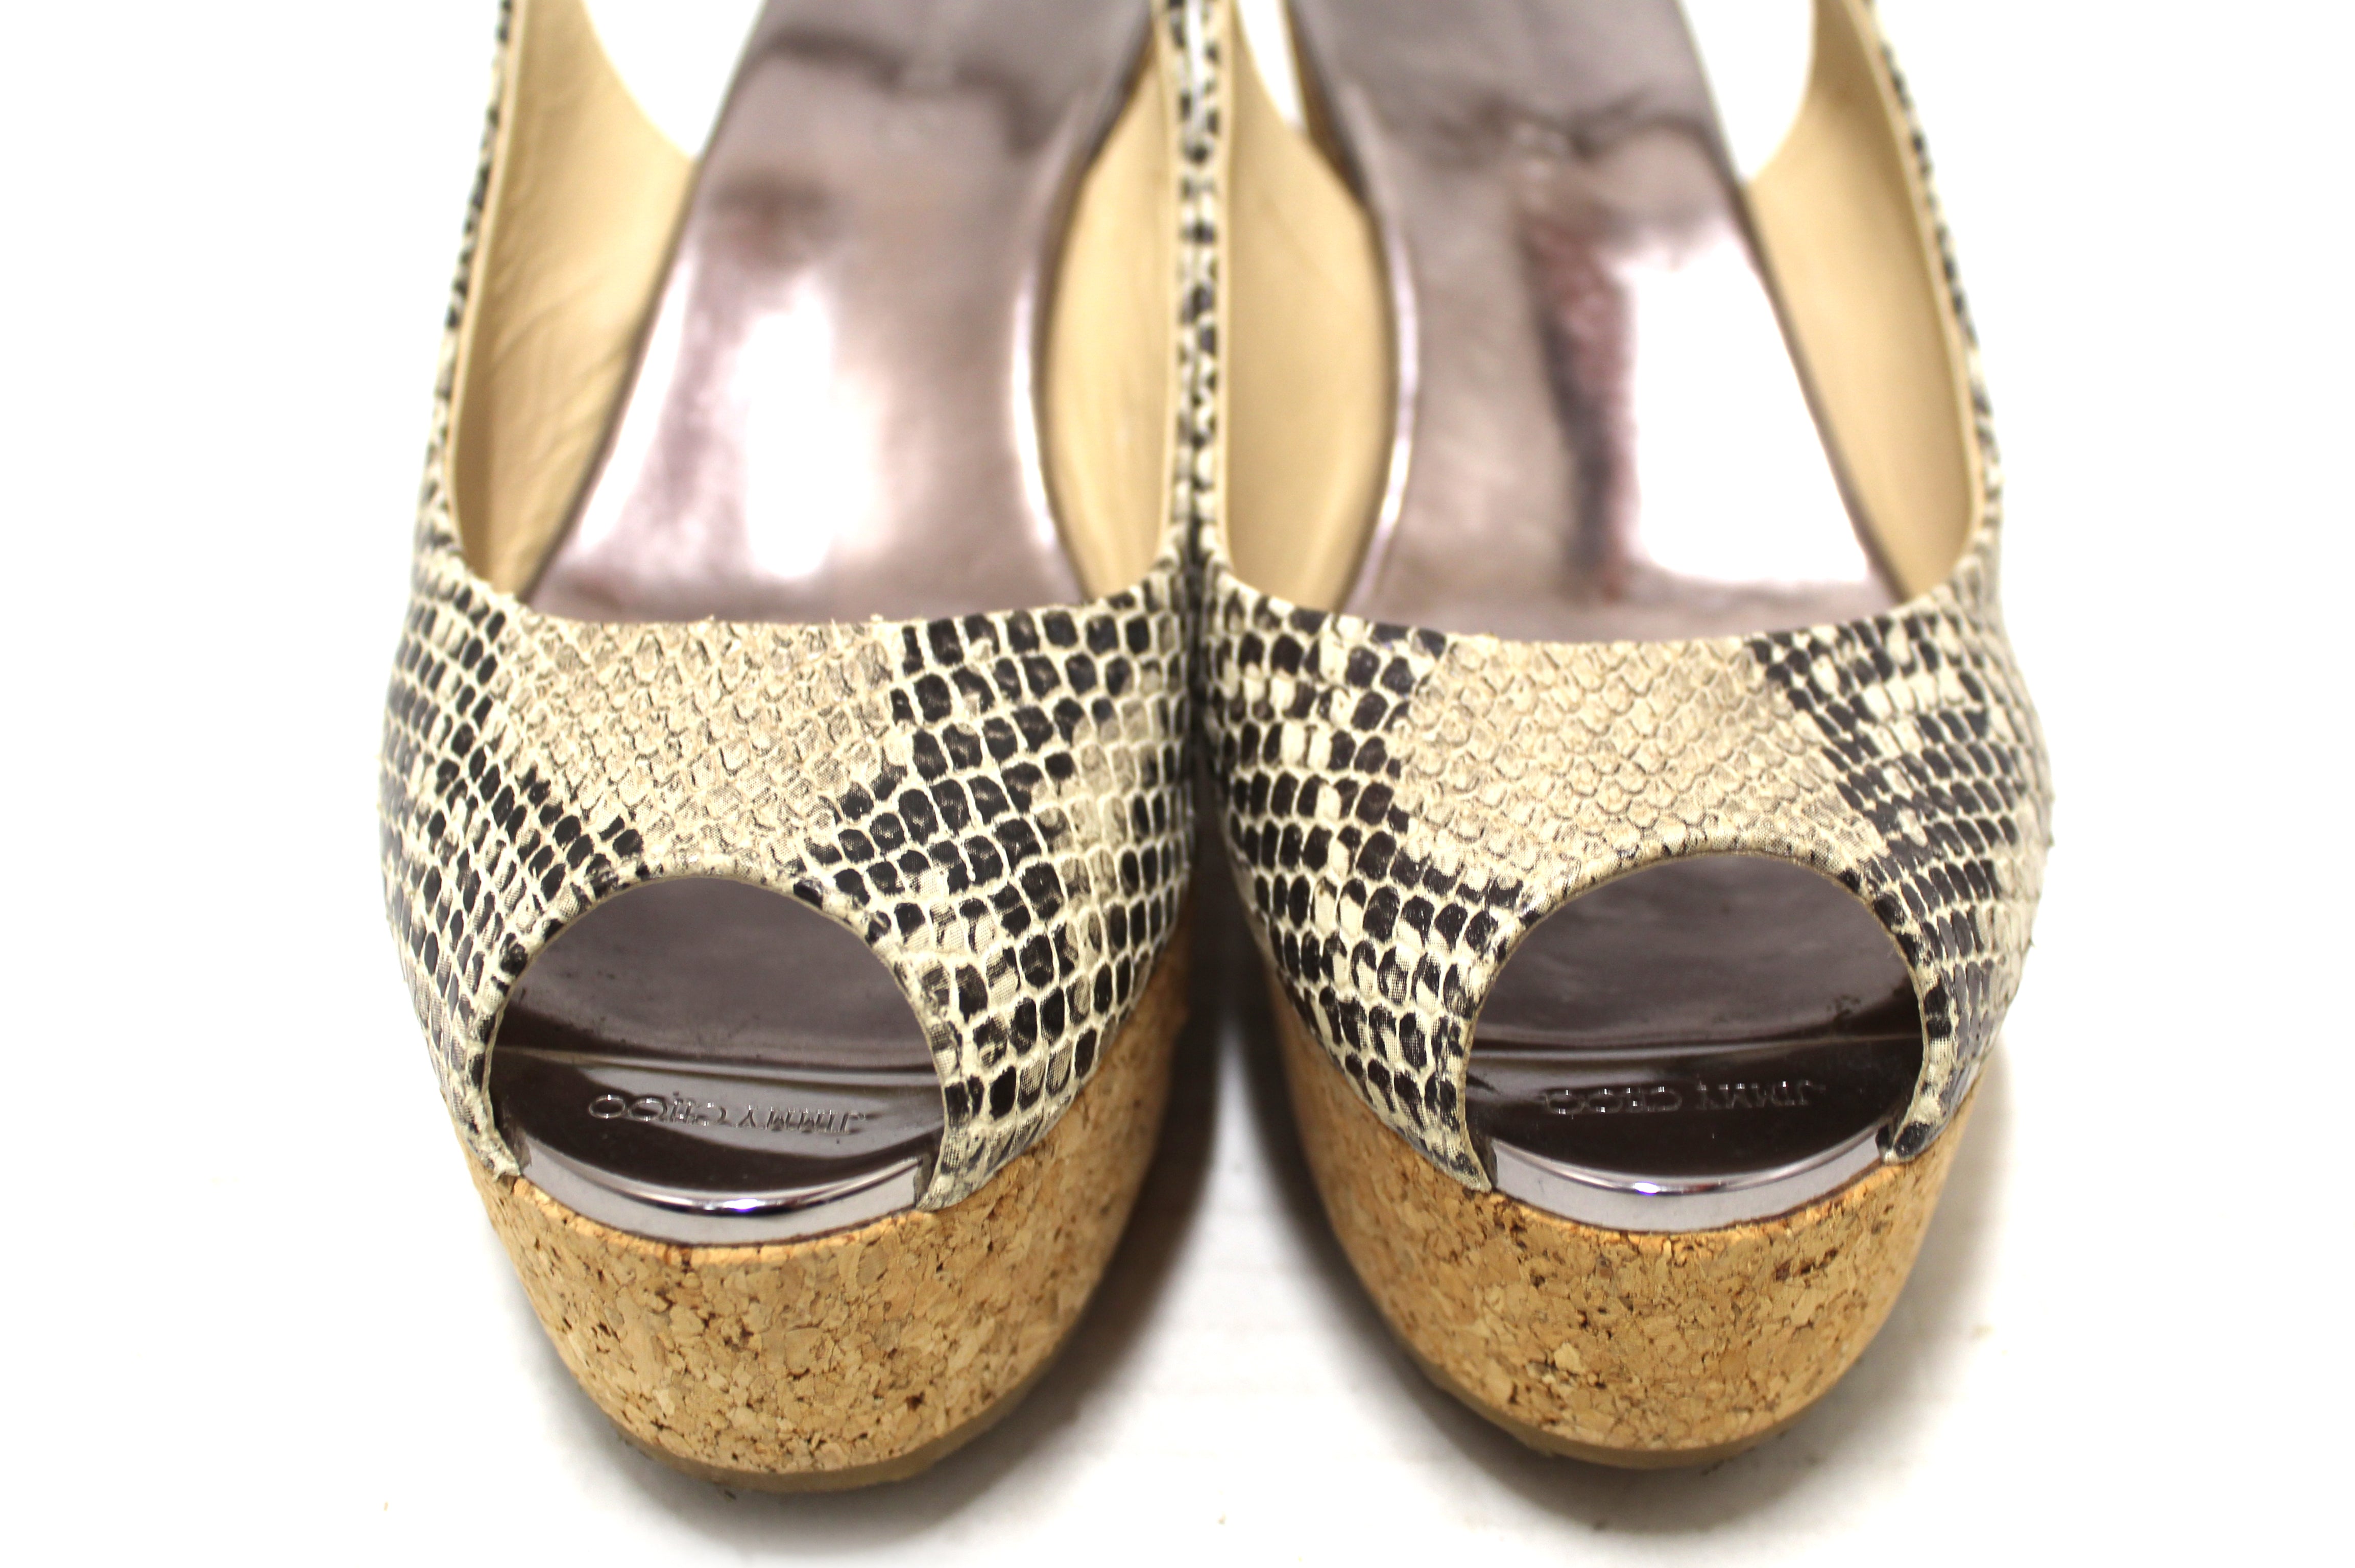 Authentic Jimmy Choo Snake Embossed Leather Cork Wedge Heel size 37